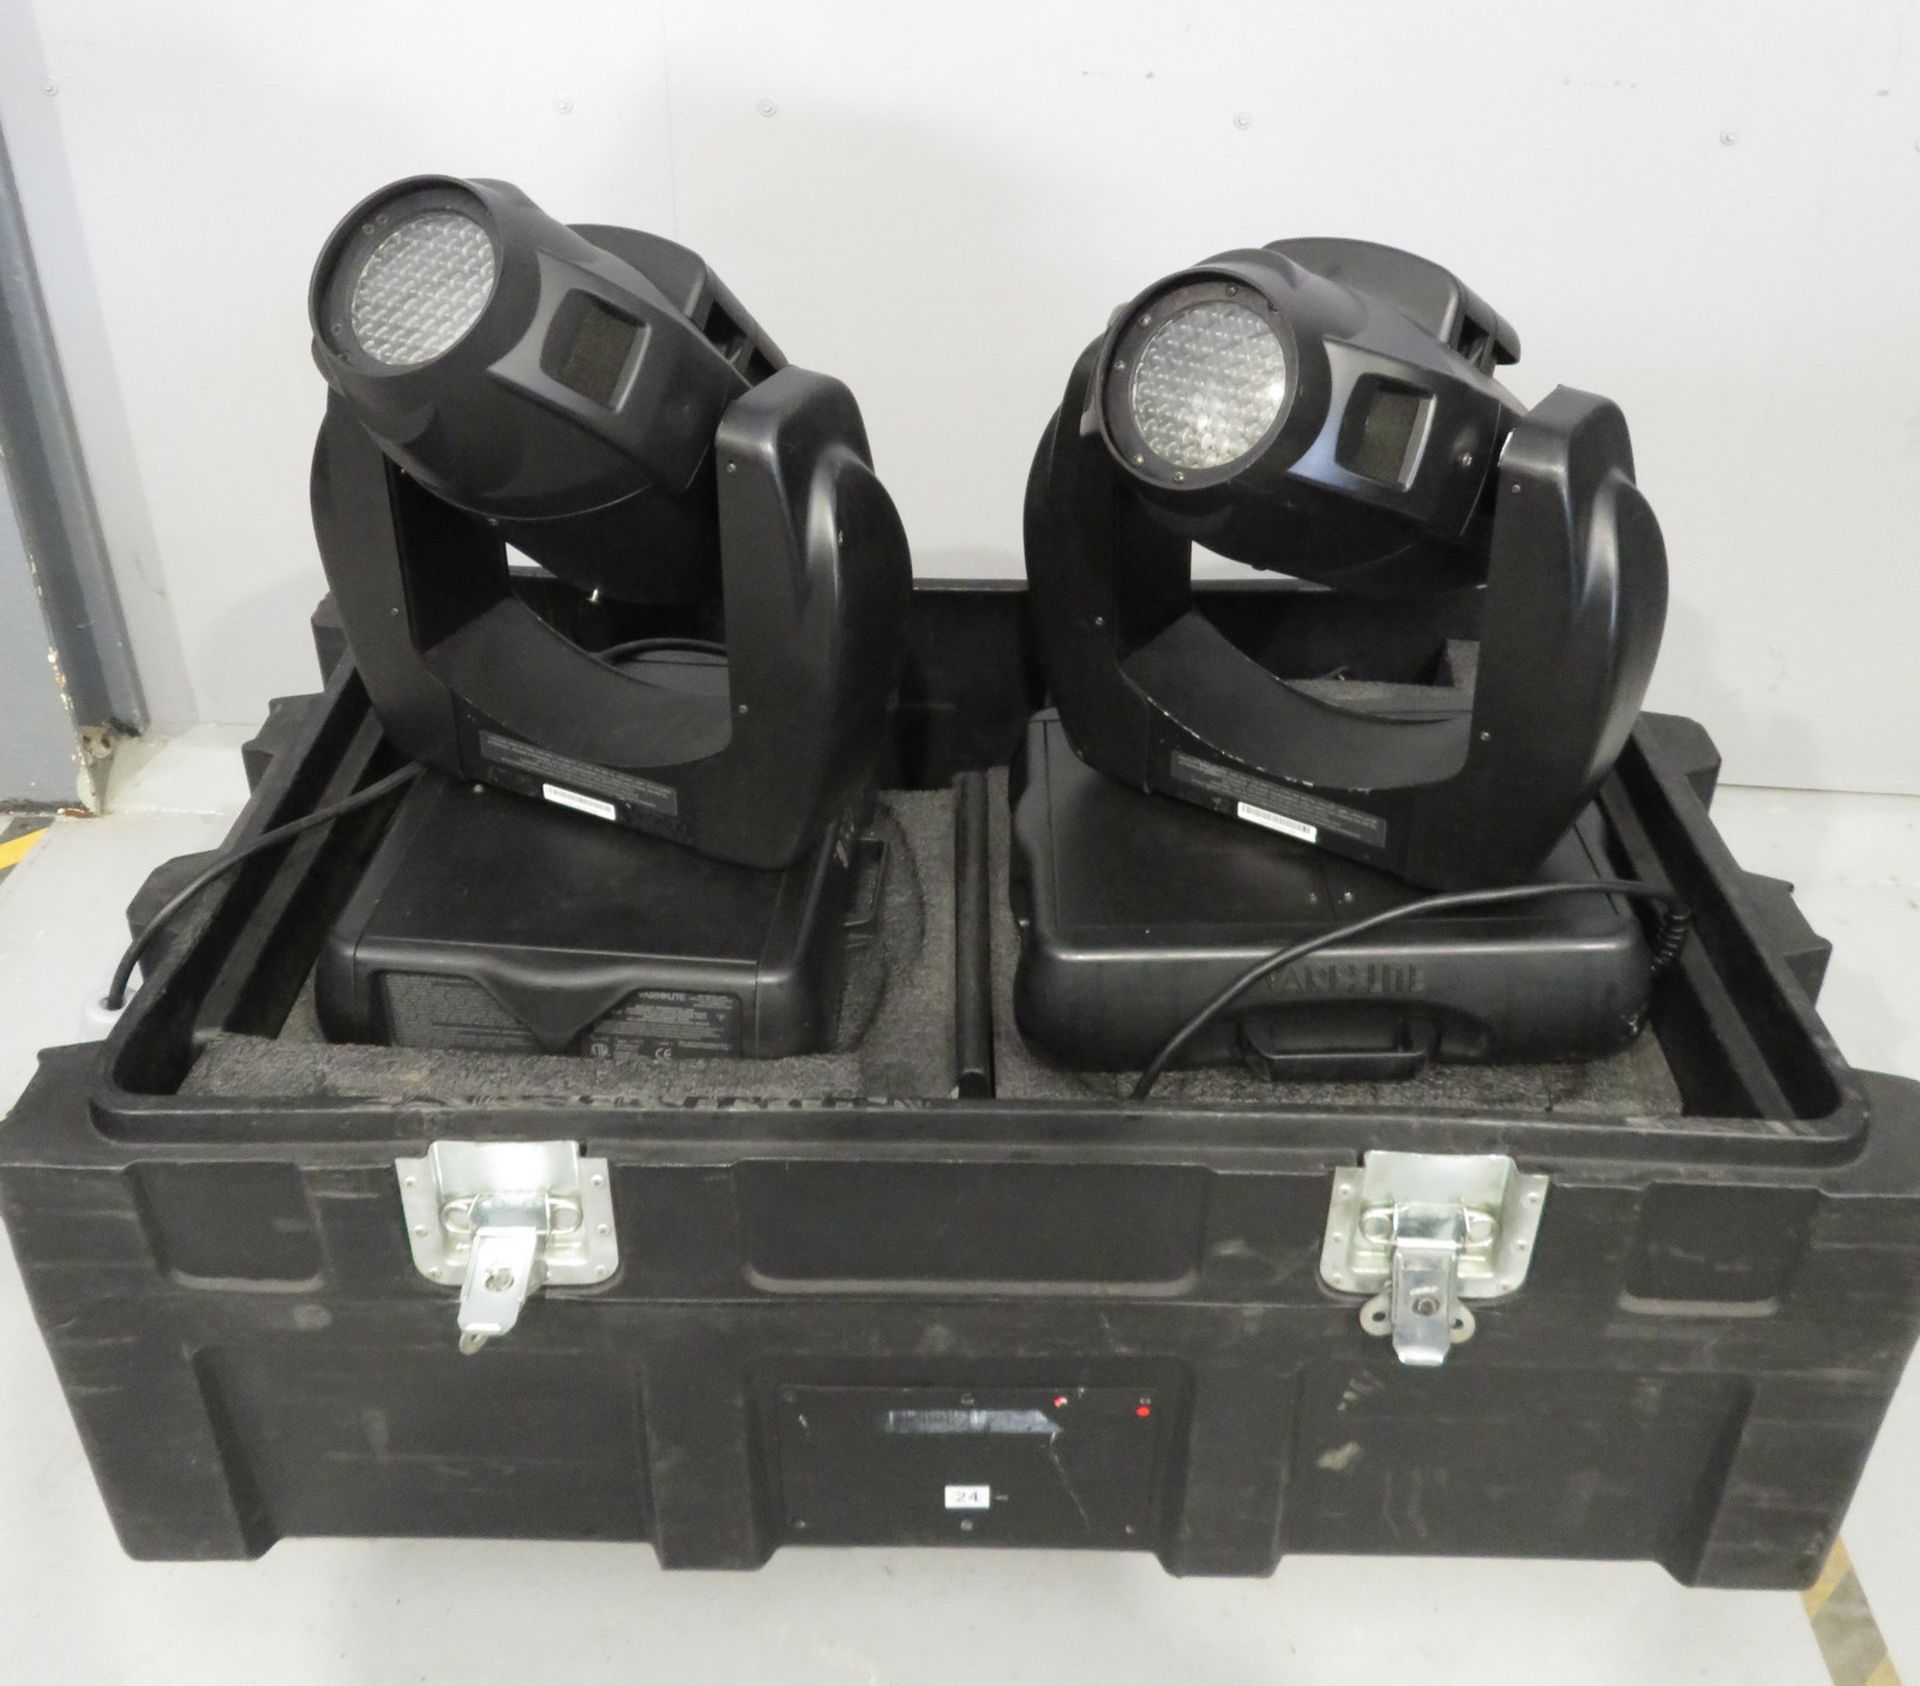 Pair of Varilite VL2402 Wash in flightcase. Includes hanging clamps and safety bonds. Work